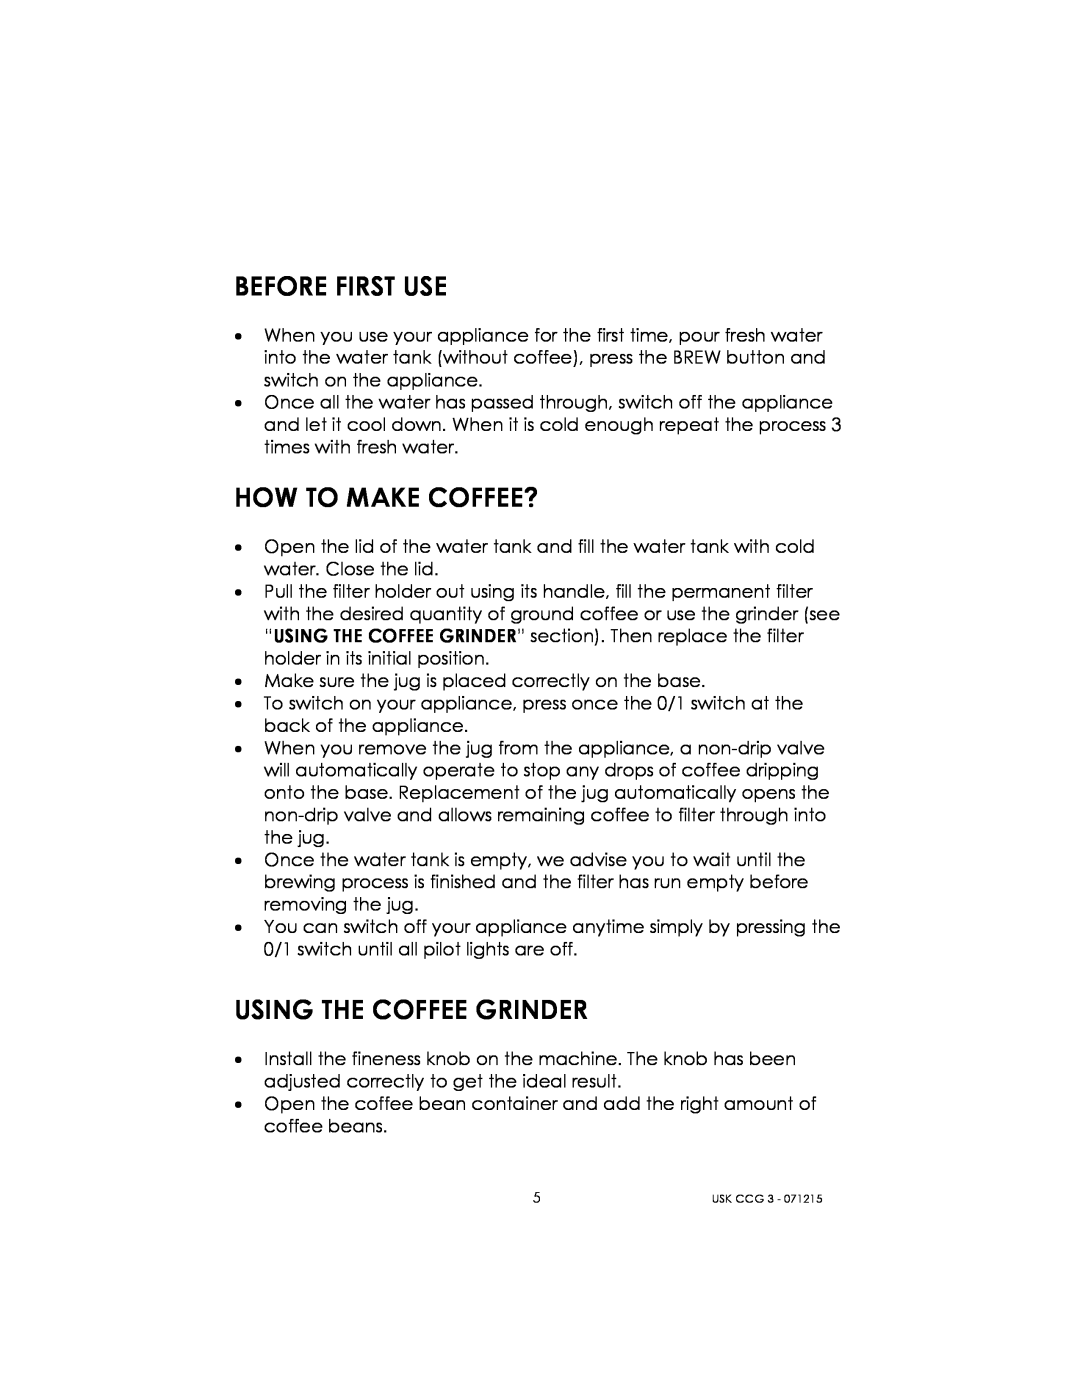 Kalorik USK CCG 3 manual Before First Use, How To Make Coffee?, Using The Coffee Grinder 